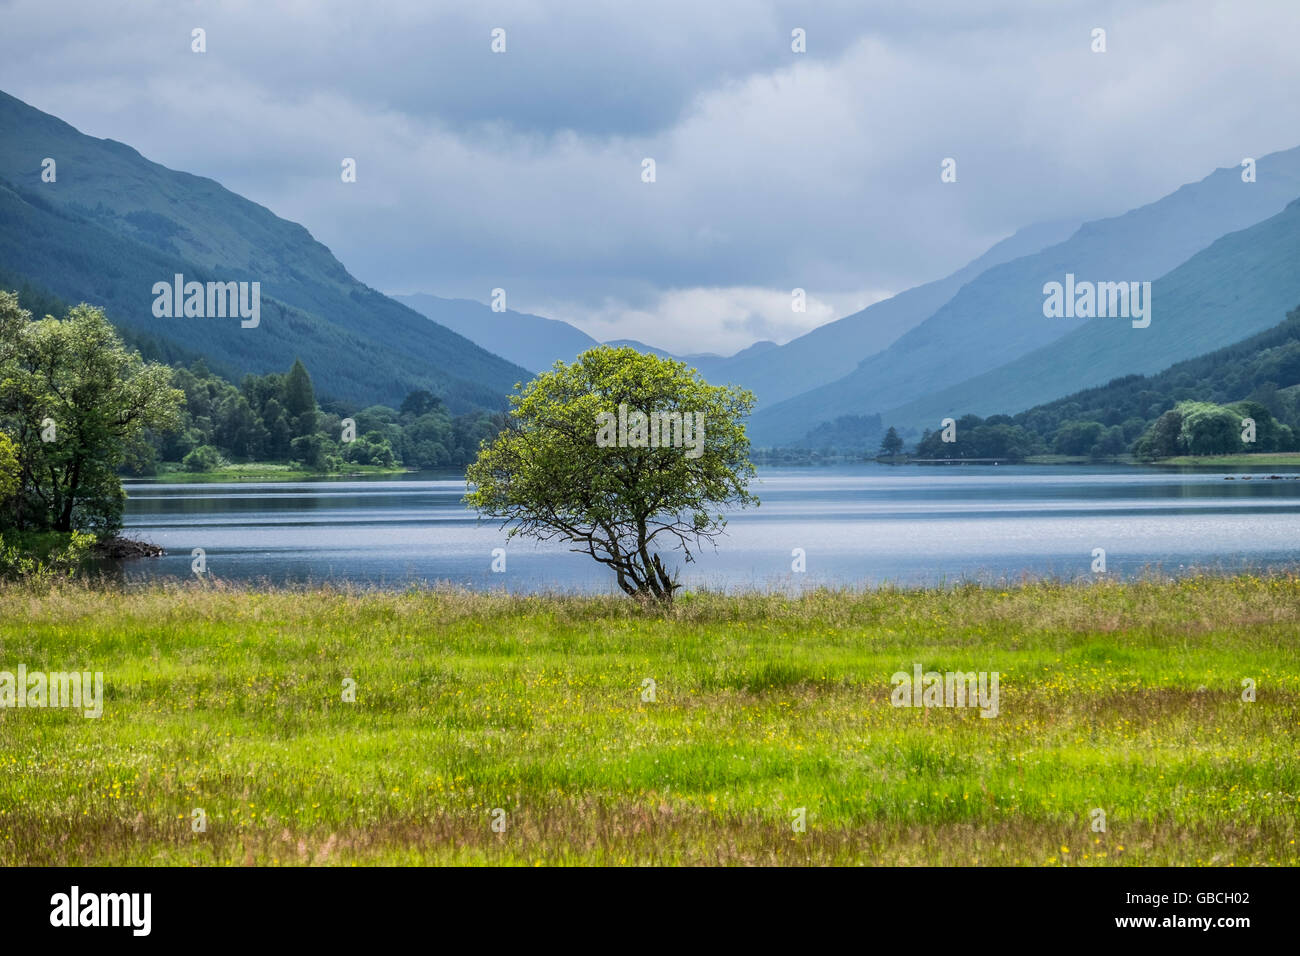 Iconic Scottish scenery looking towards Loch Voil from Balquhidder with hills and glens beyond. Stock Photo